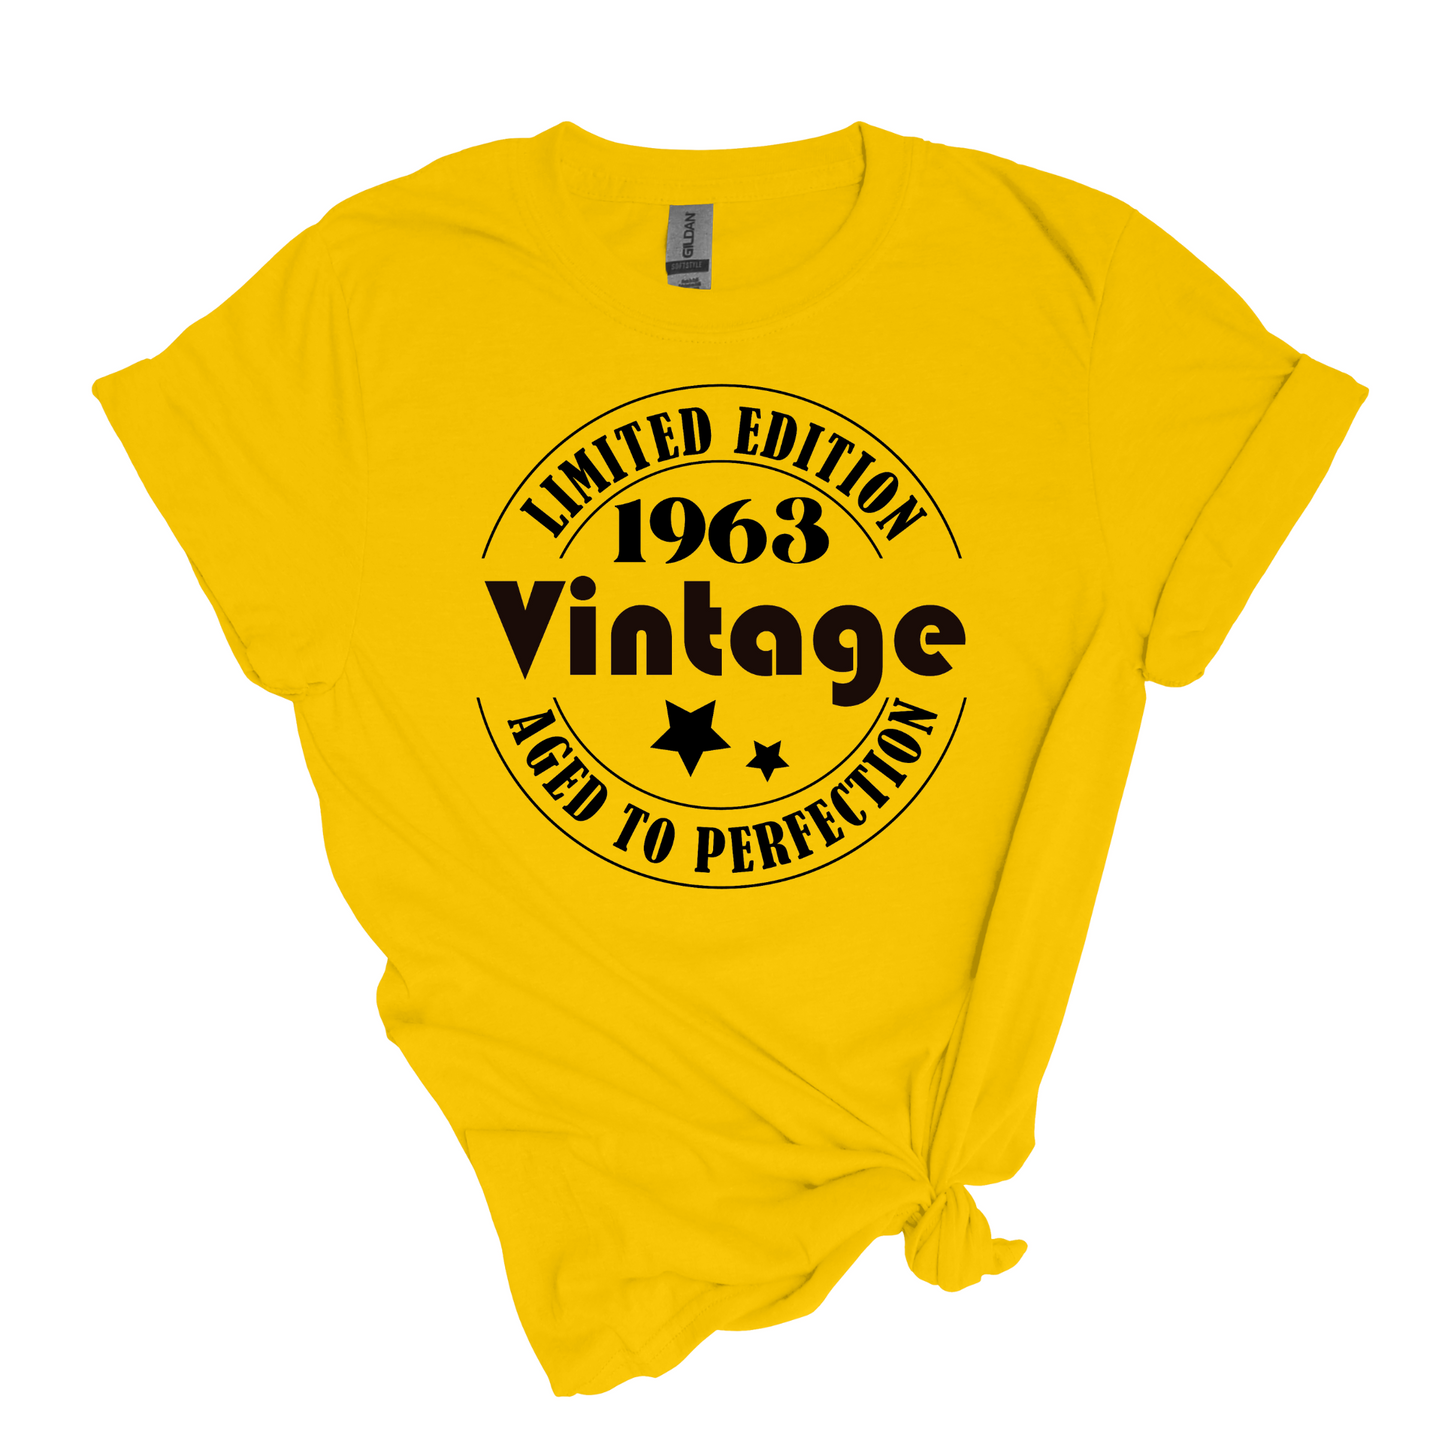 Vintage Birthday T-shirt - Aged to perfection - Adult Unisex Soft Style T-shirt - Customize with birth year